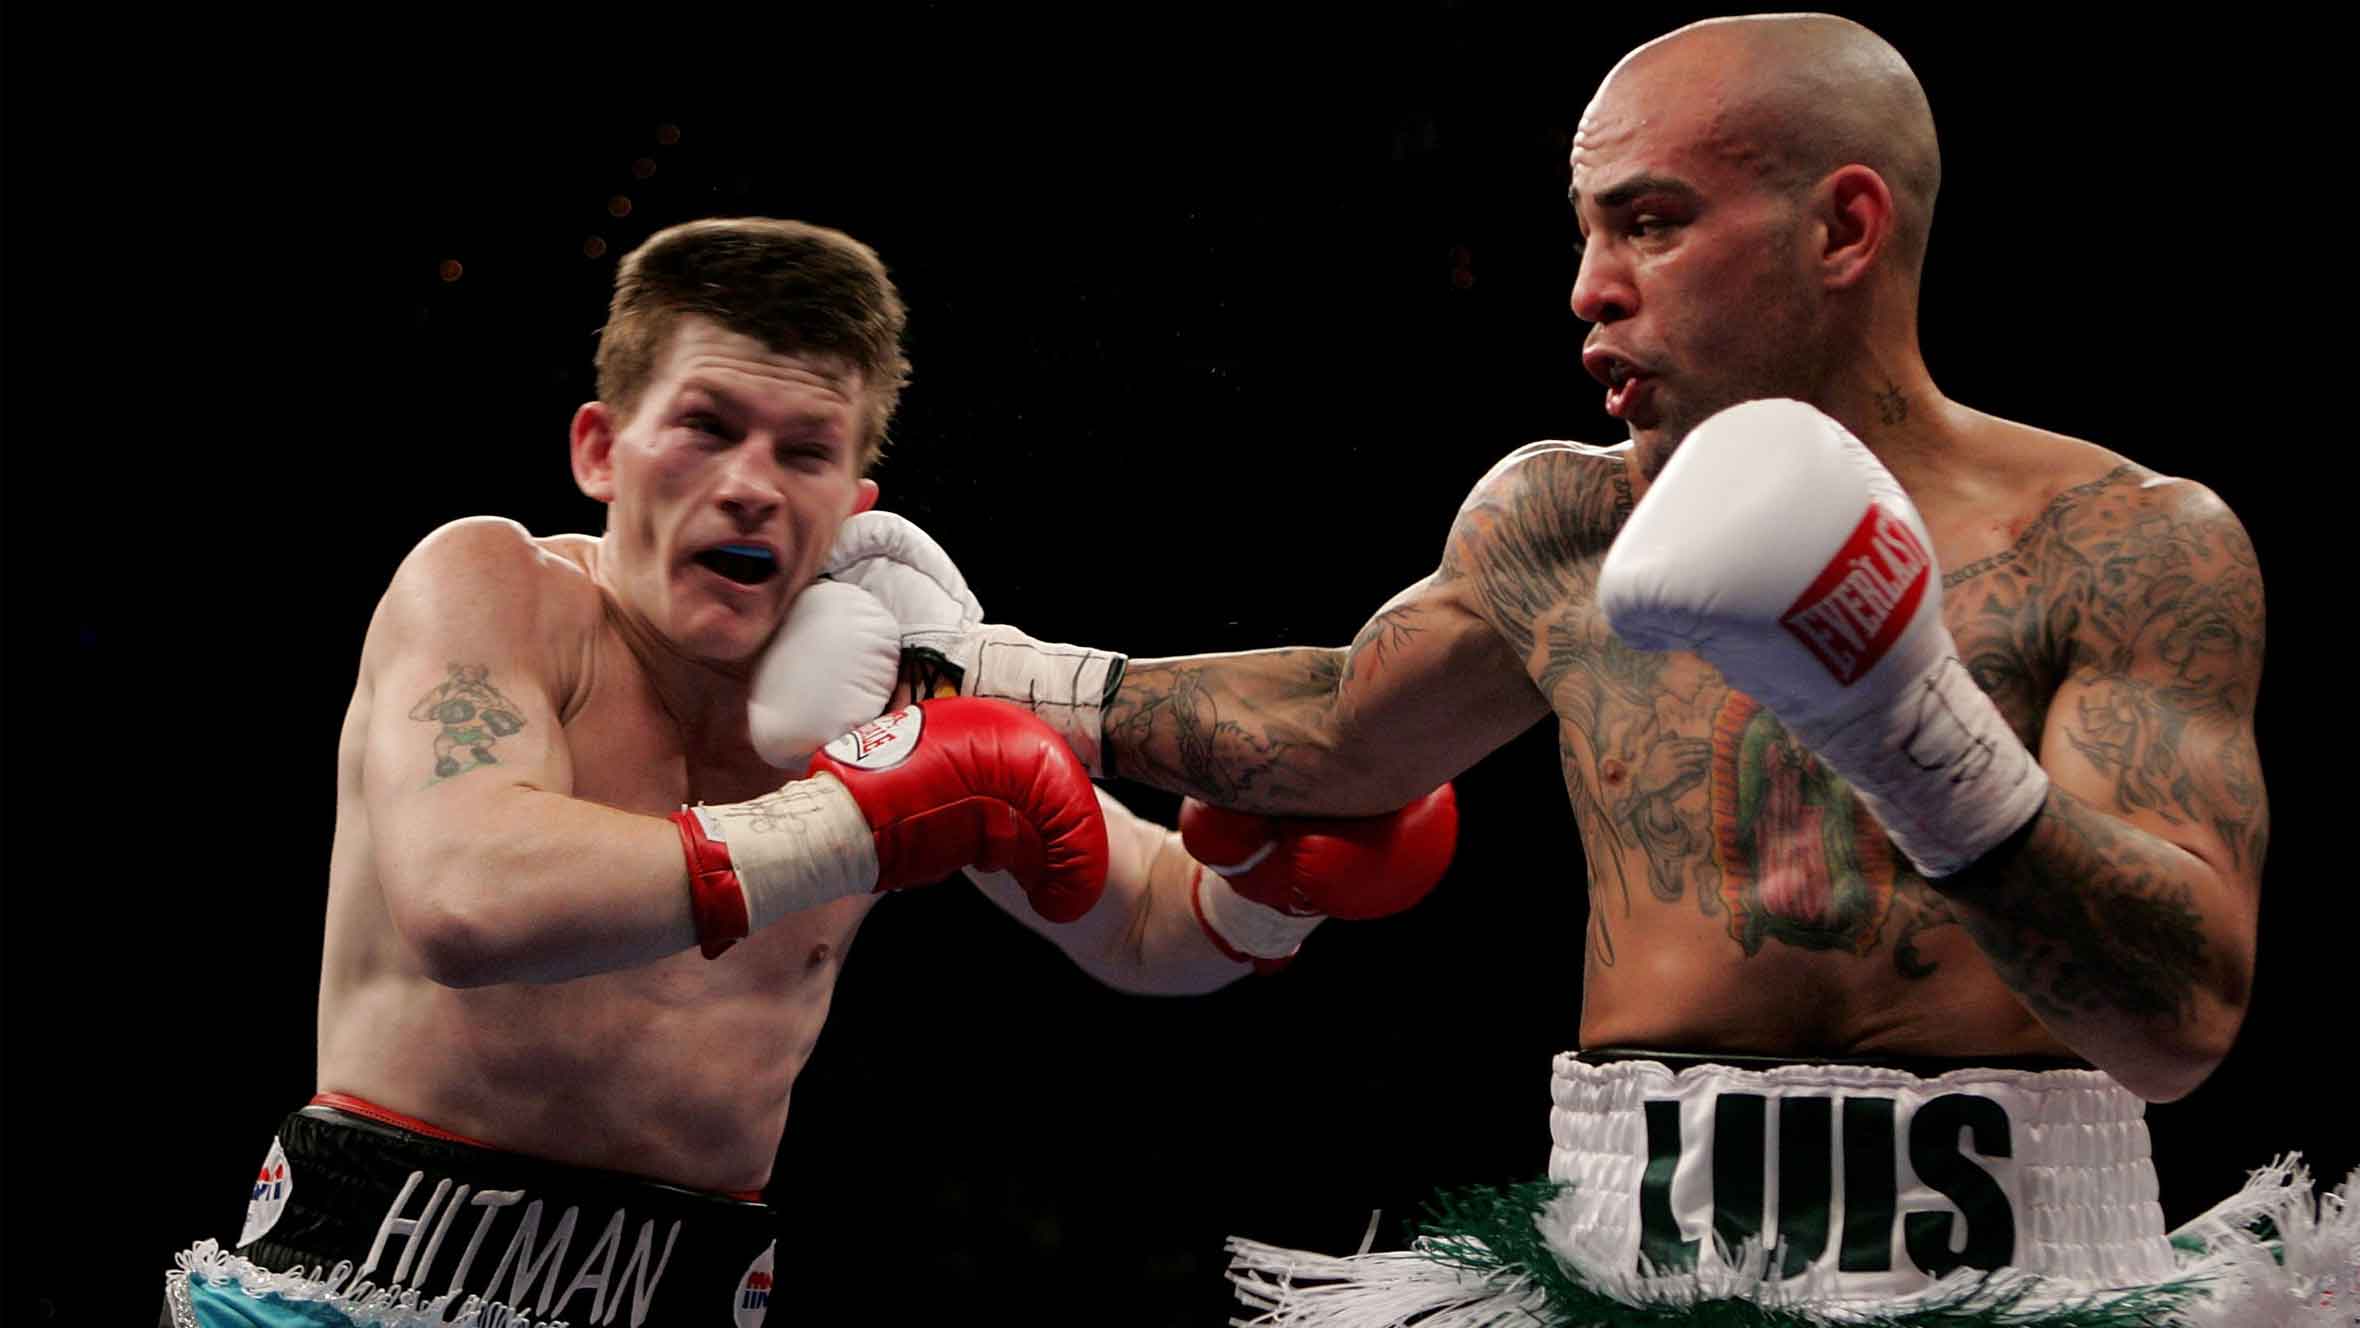 Luis Collazo: My top 3 fights